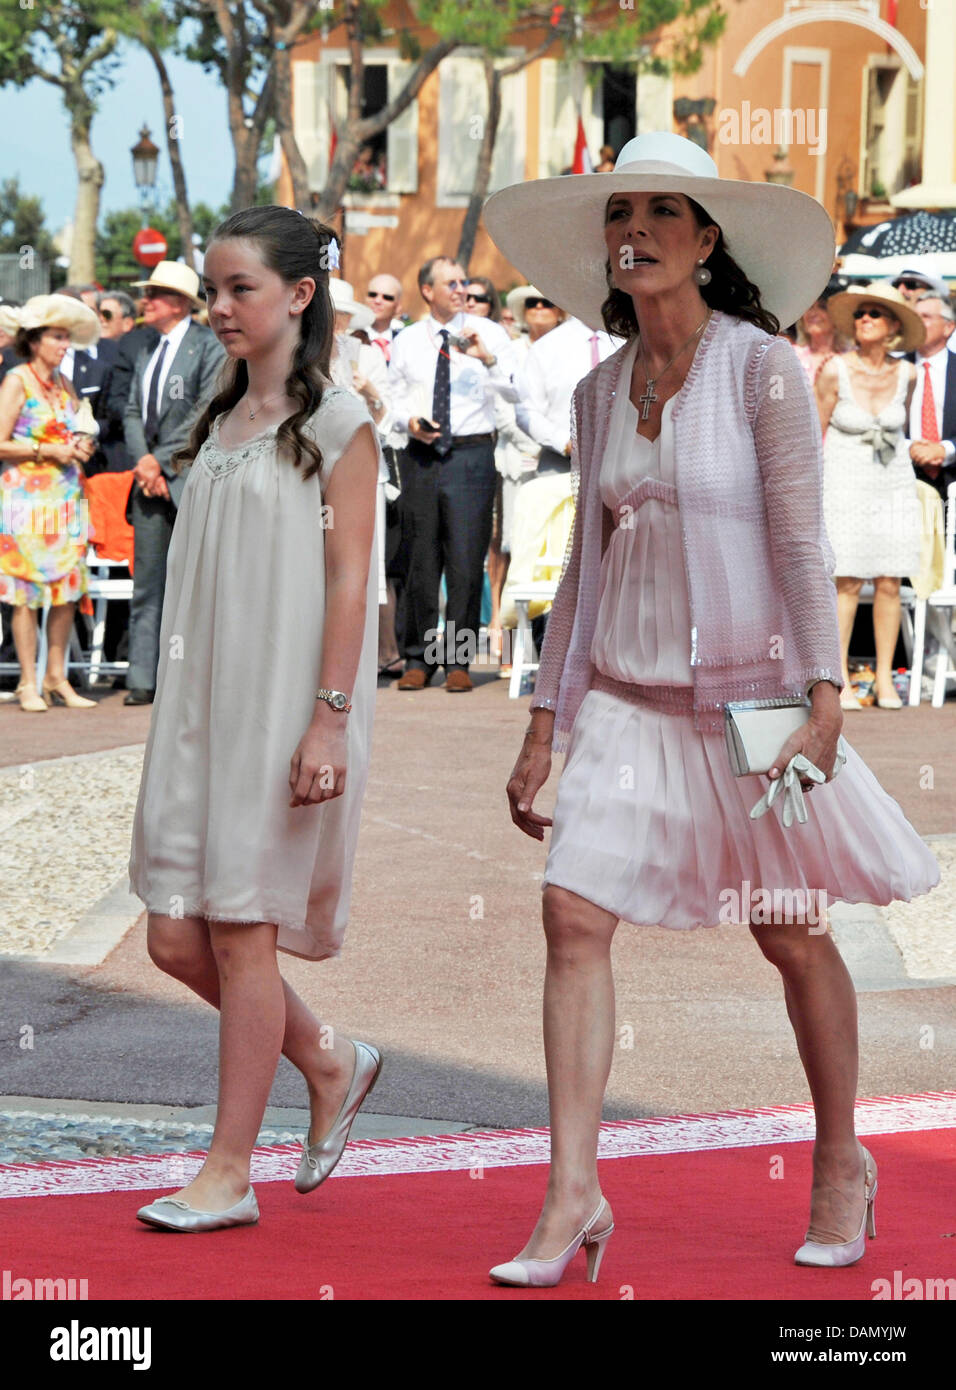 Caroline Princess of Hanover and her daughter Princess Alexandra arrive for  the religious wedding of Prince Albert II with Charlene Wittstock in the  Prince's Palace in Monaco, 02 July 2011. Some 3500